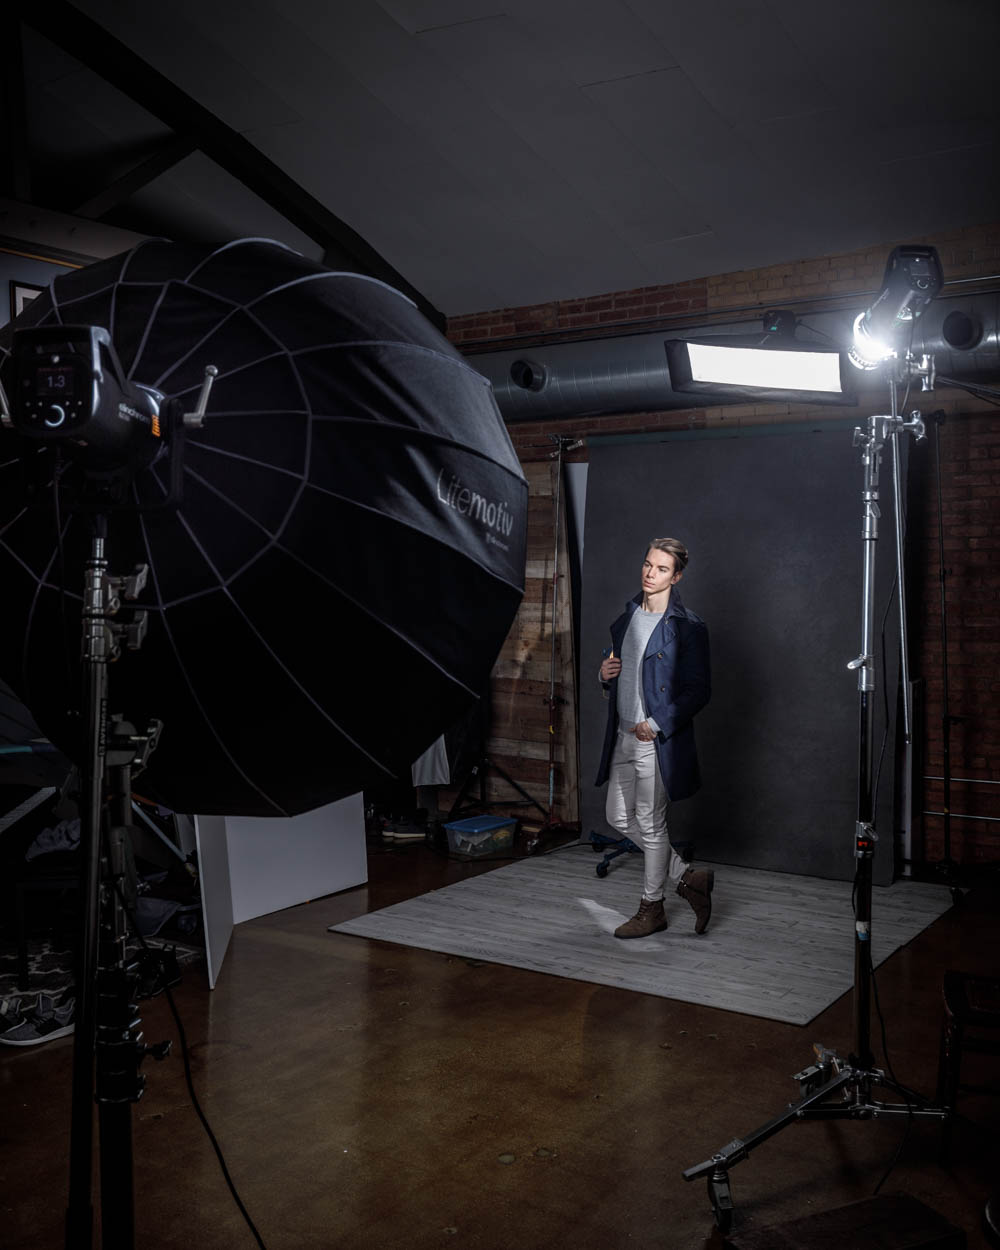 Behind the scenes with Erik during his headshot shoot in Chicago